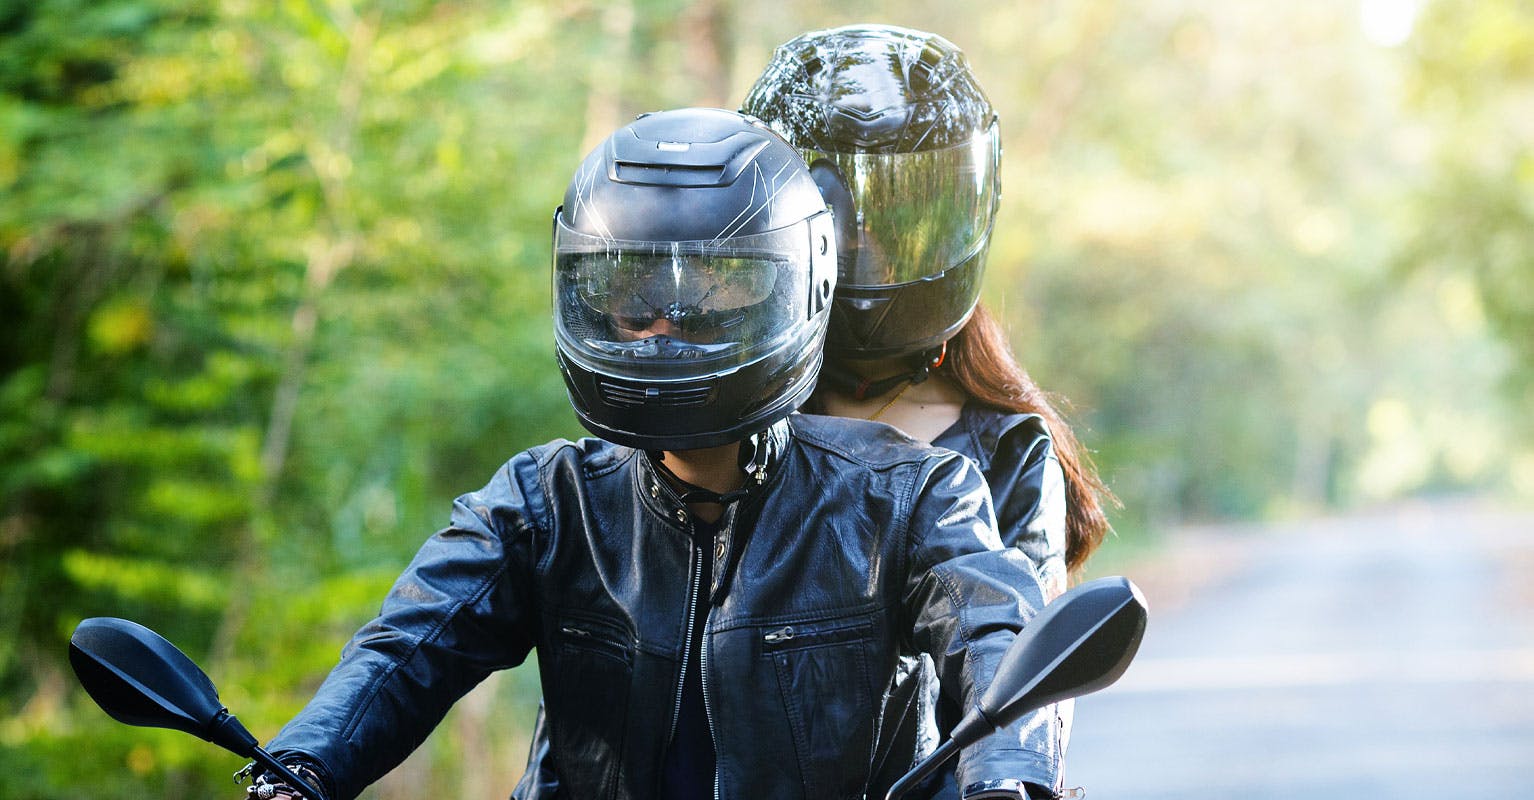 Couple riding a motorcycle while wearing helmets